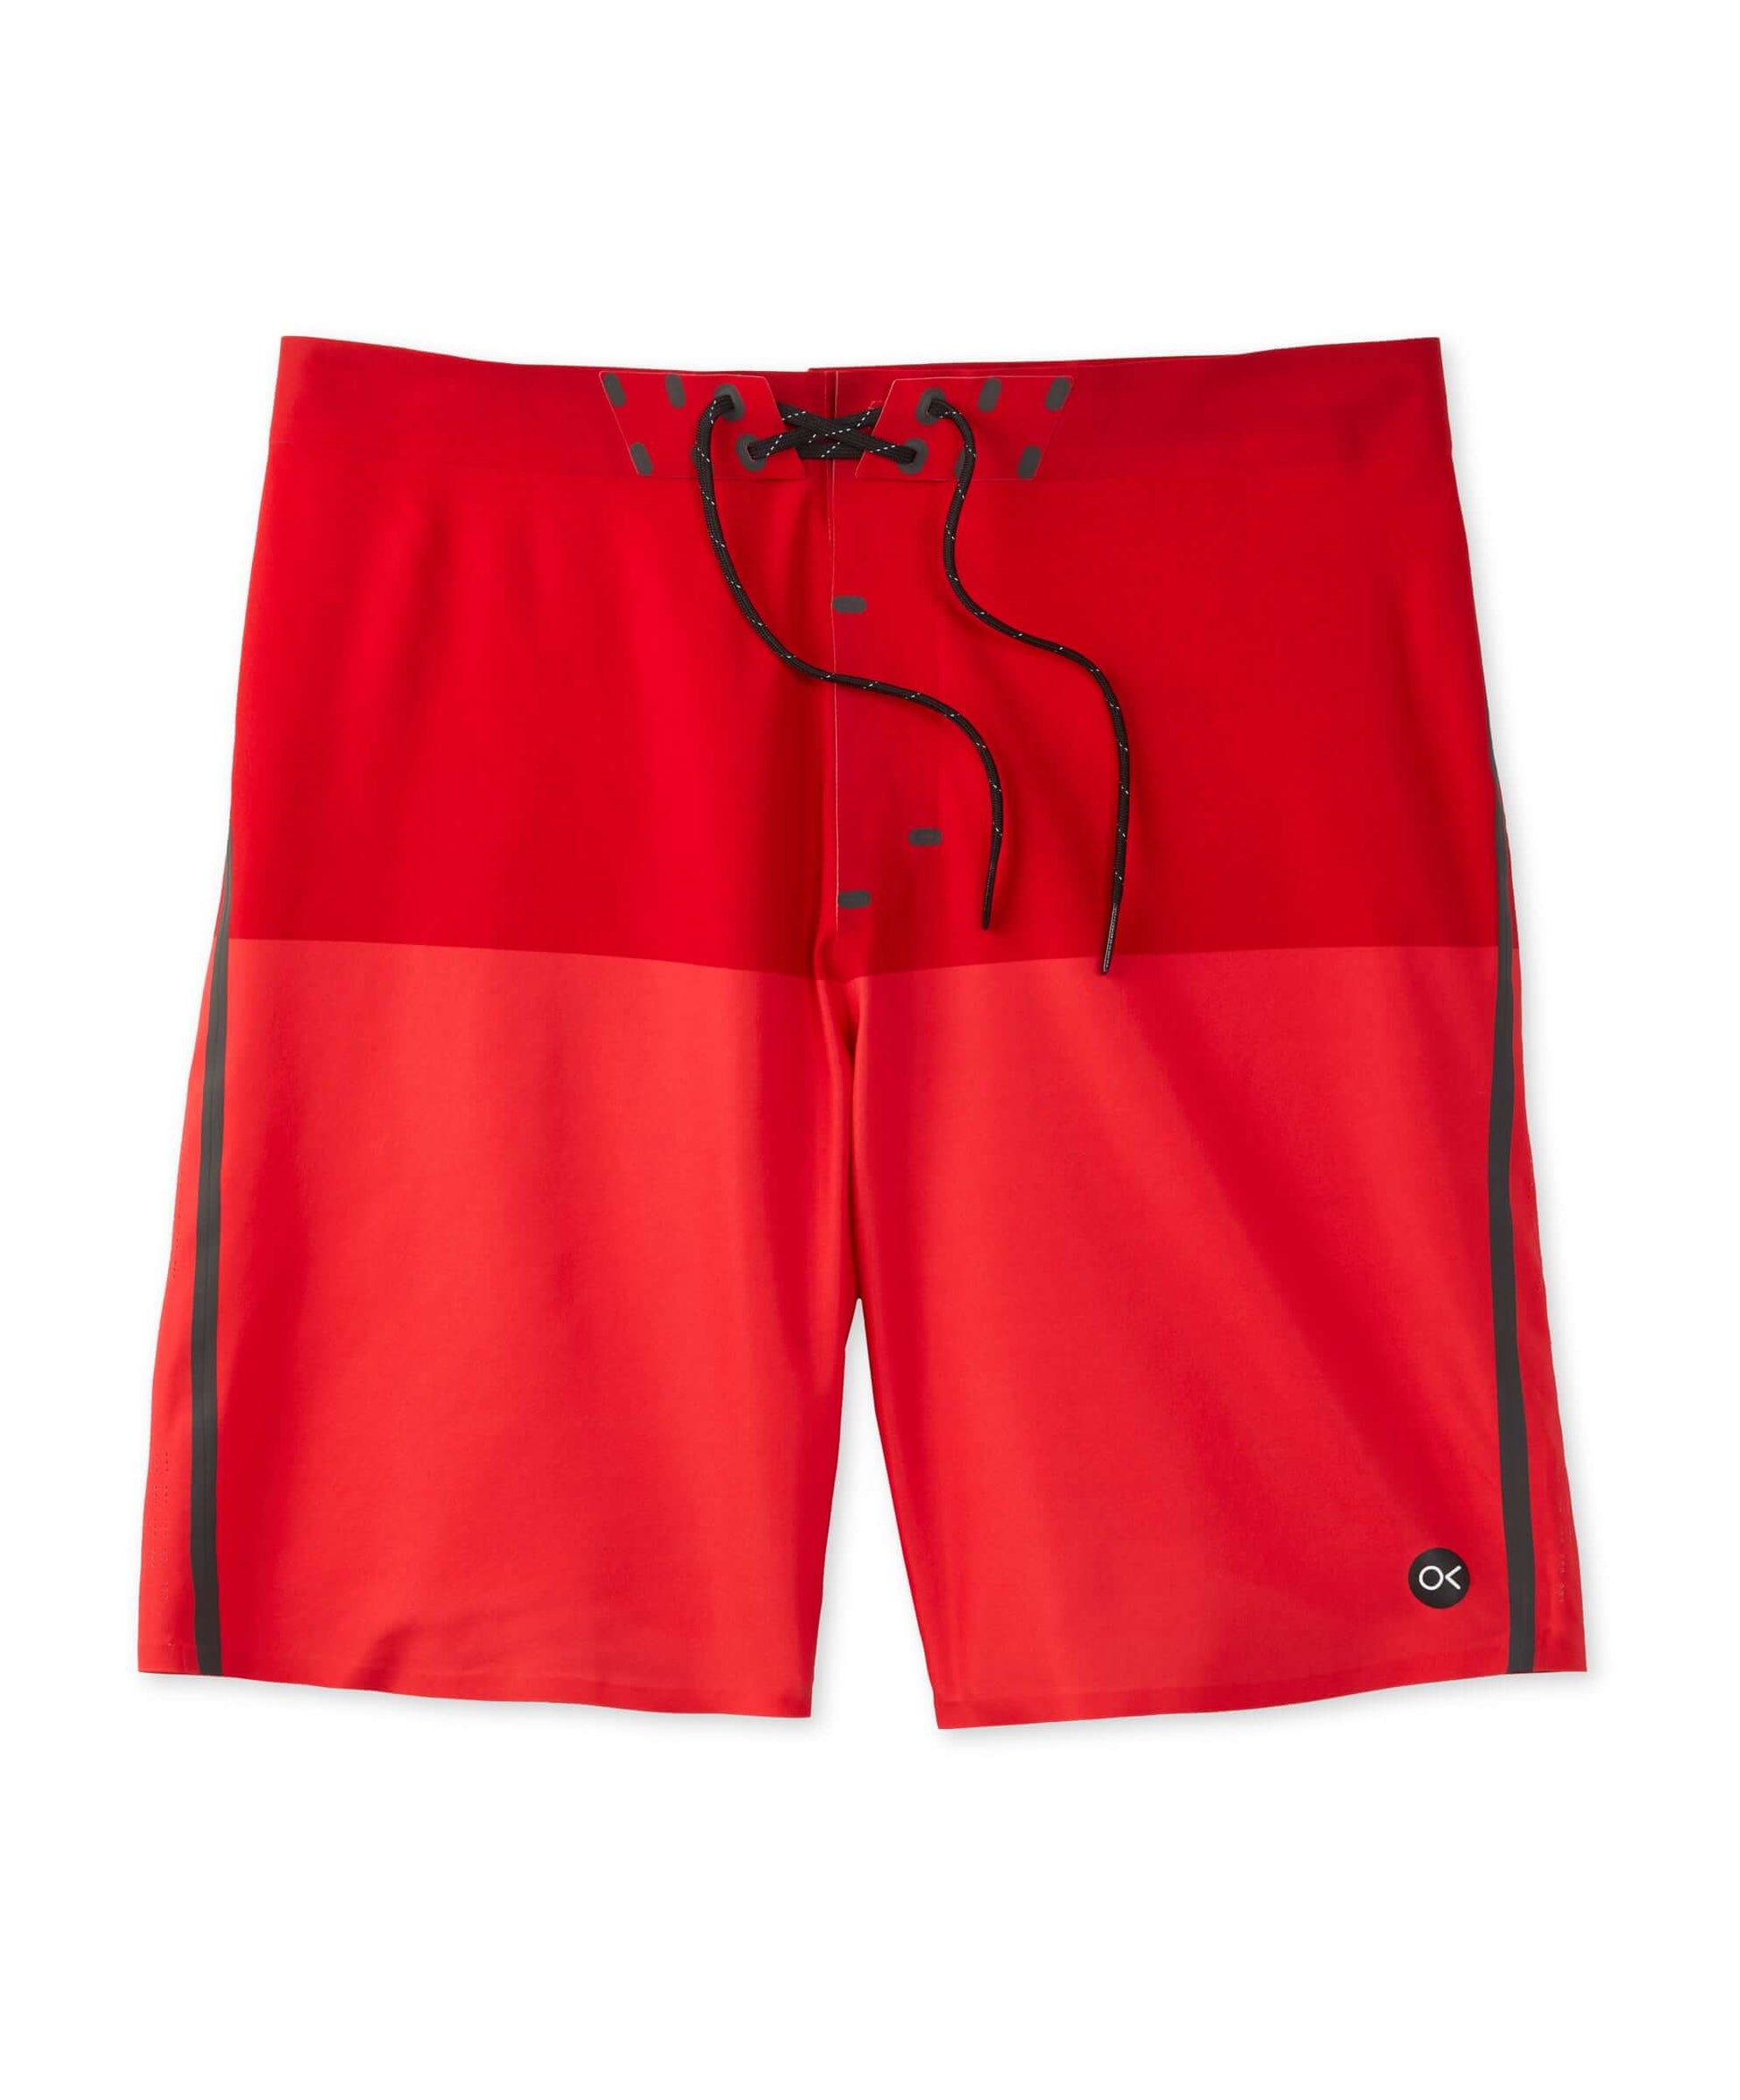 Outerknown-Kelly-Slater-Apex-Trunks-Red